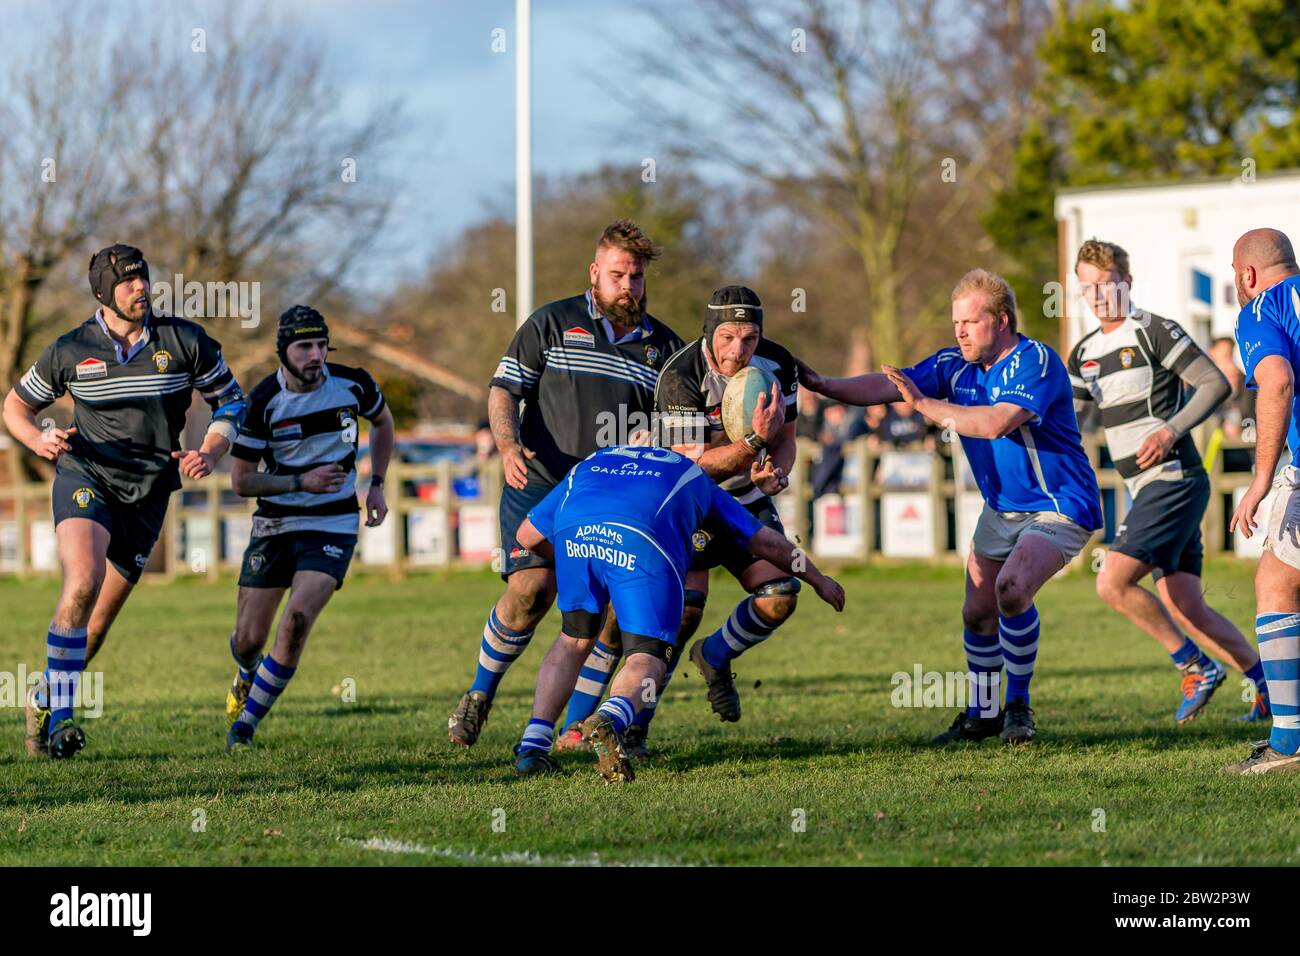 Rugby players carrying the ball crouches to push off a tackling player crouching. Eastern Counties rugby union match at Lowestoft Stock Photo